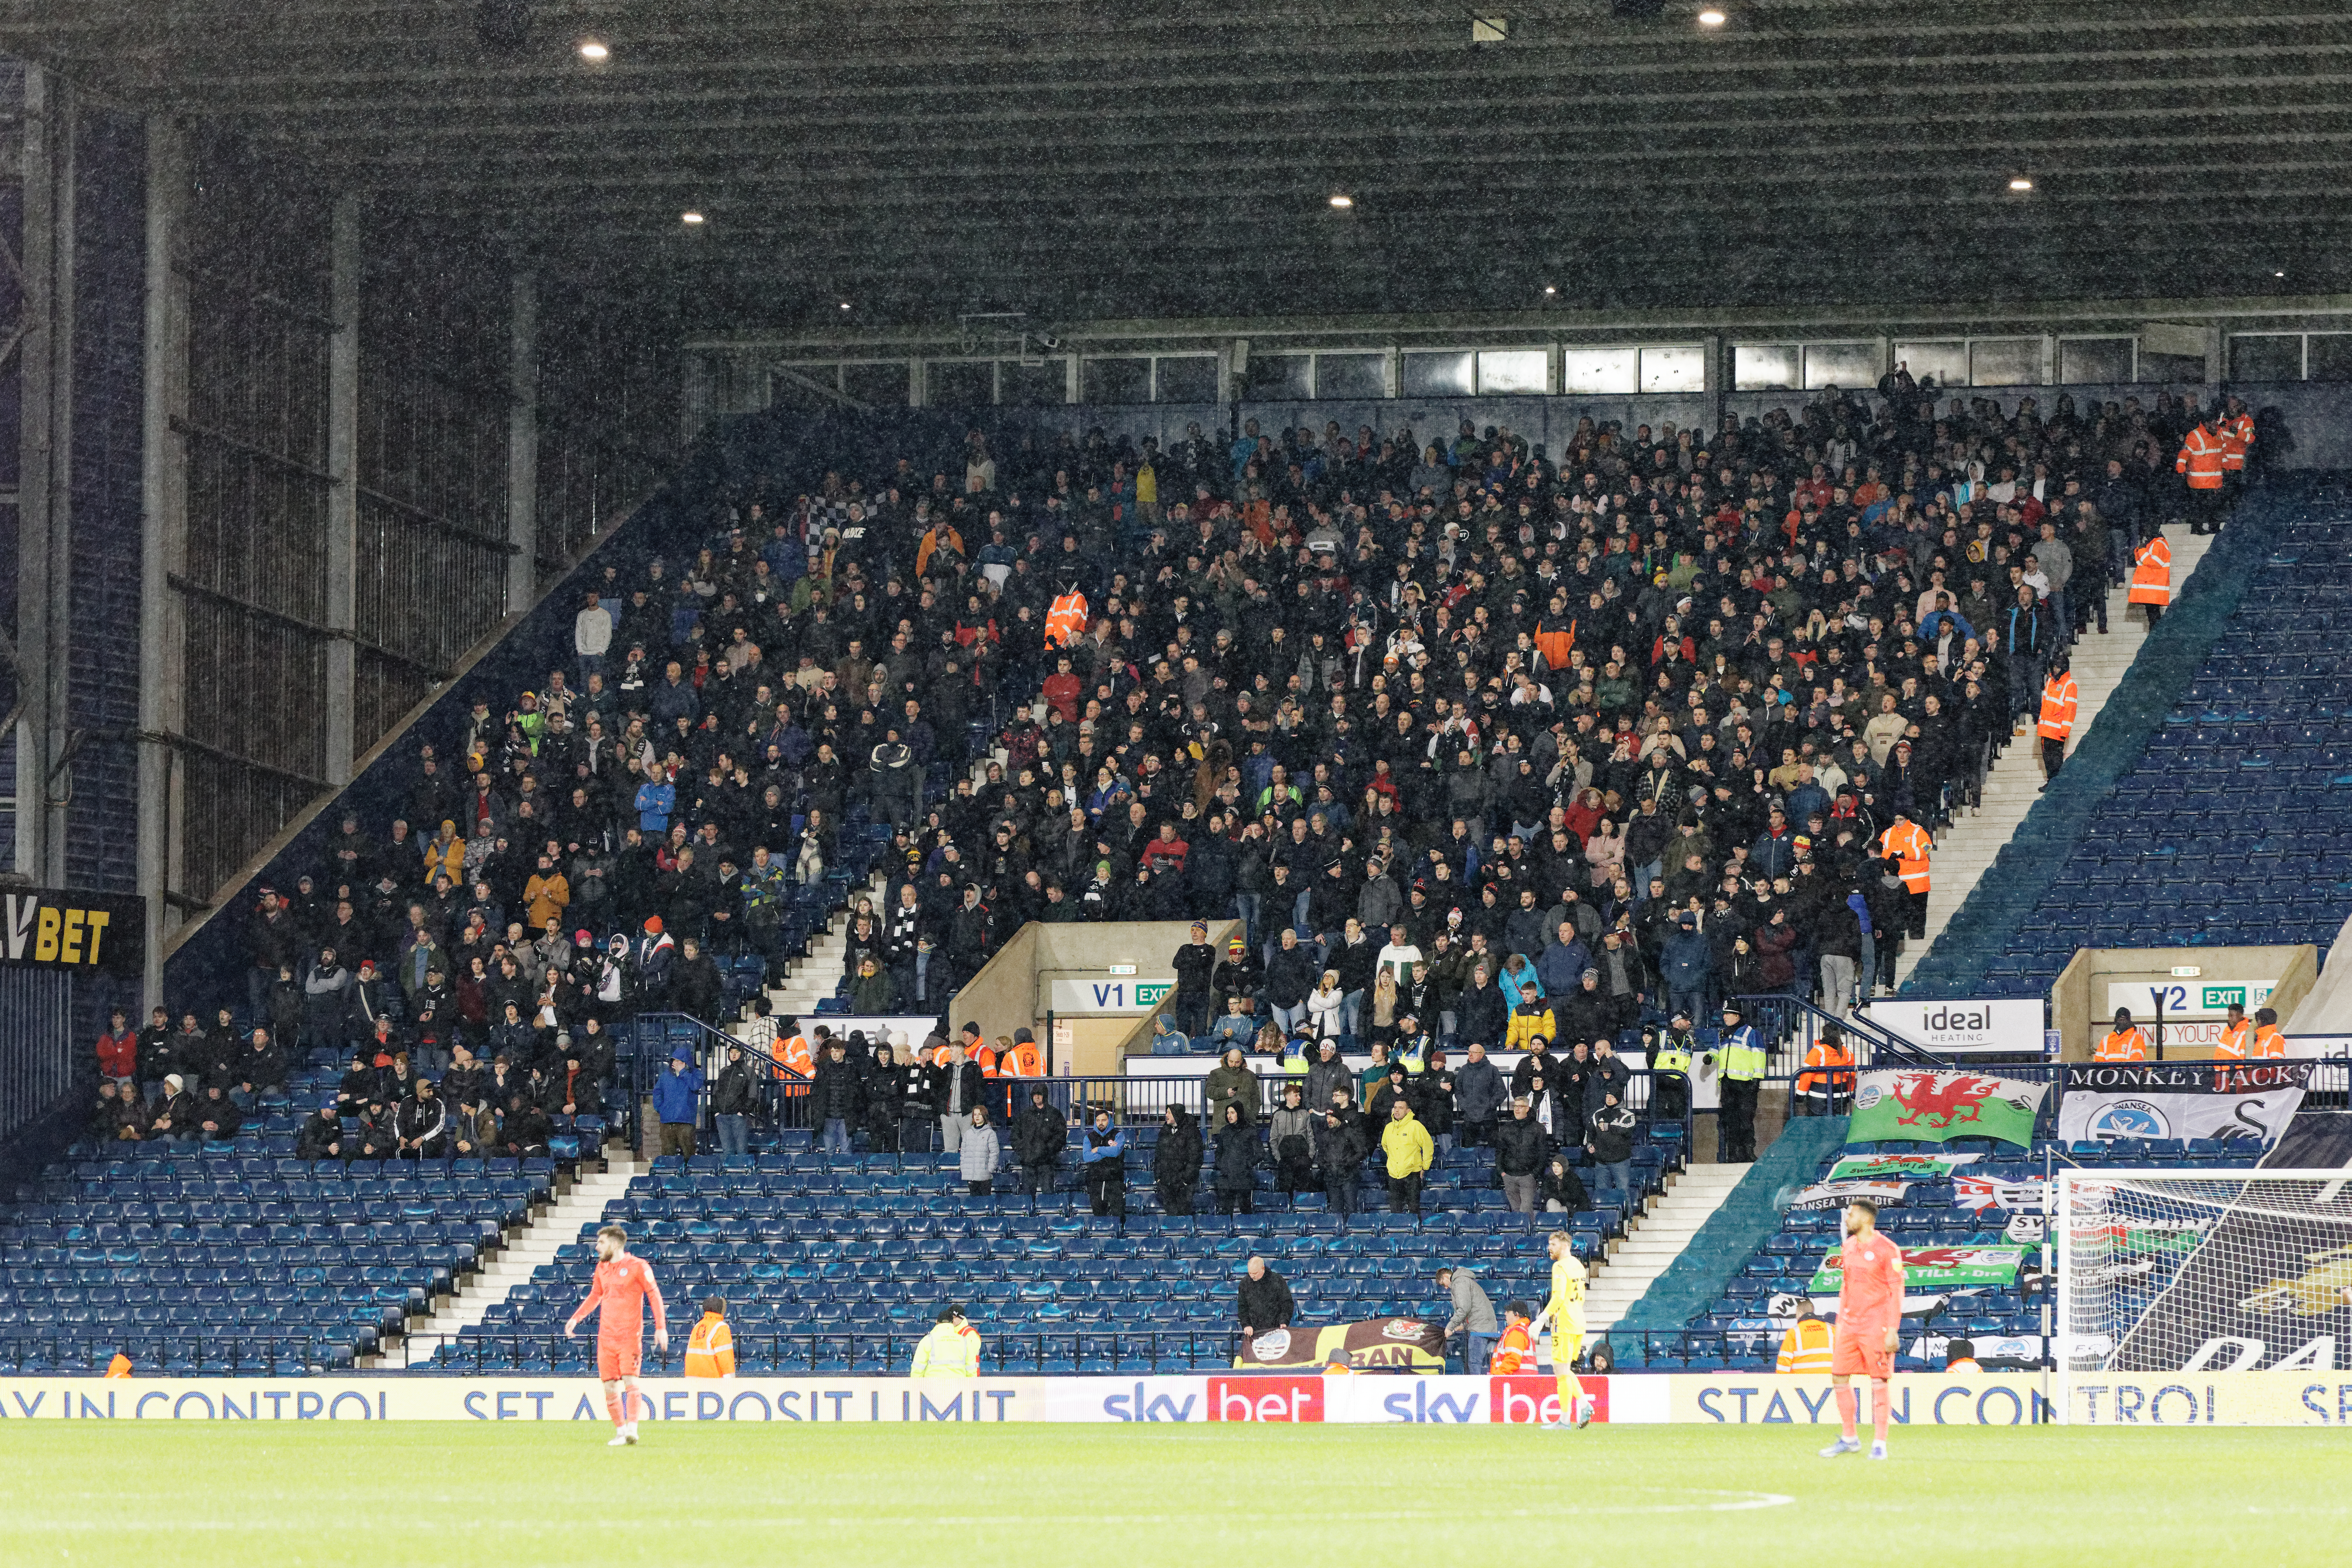 West Brom (a) fans 21-22